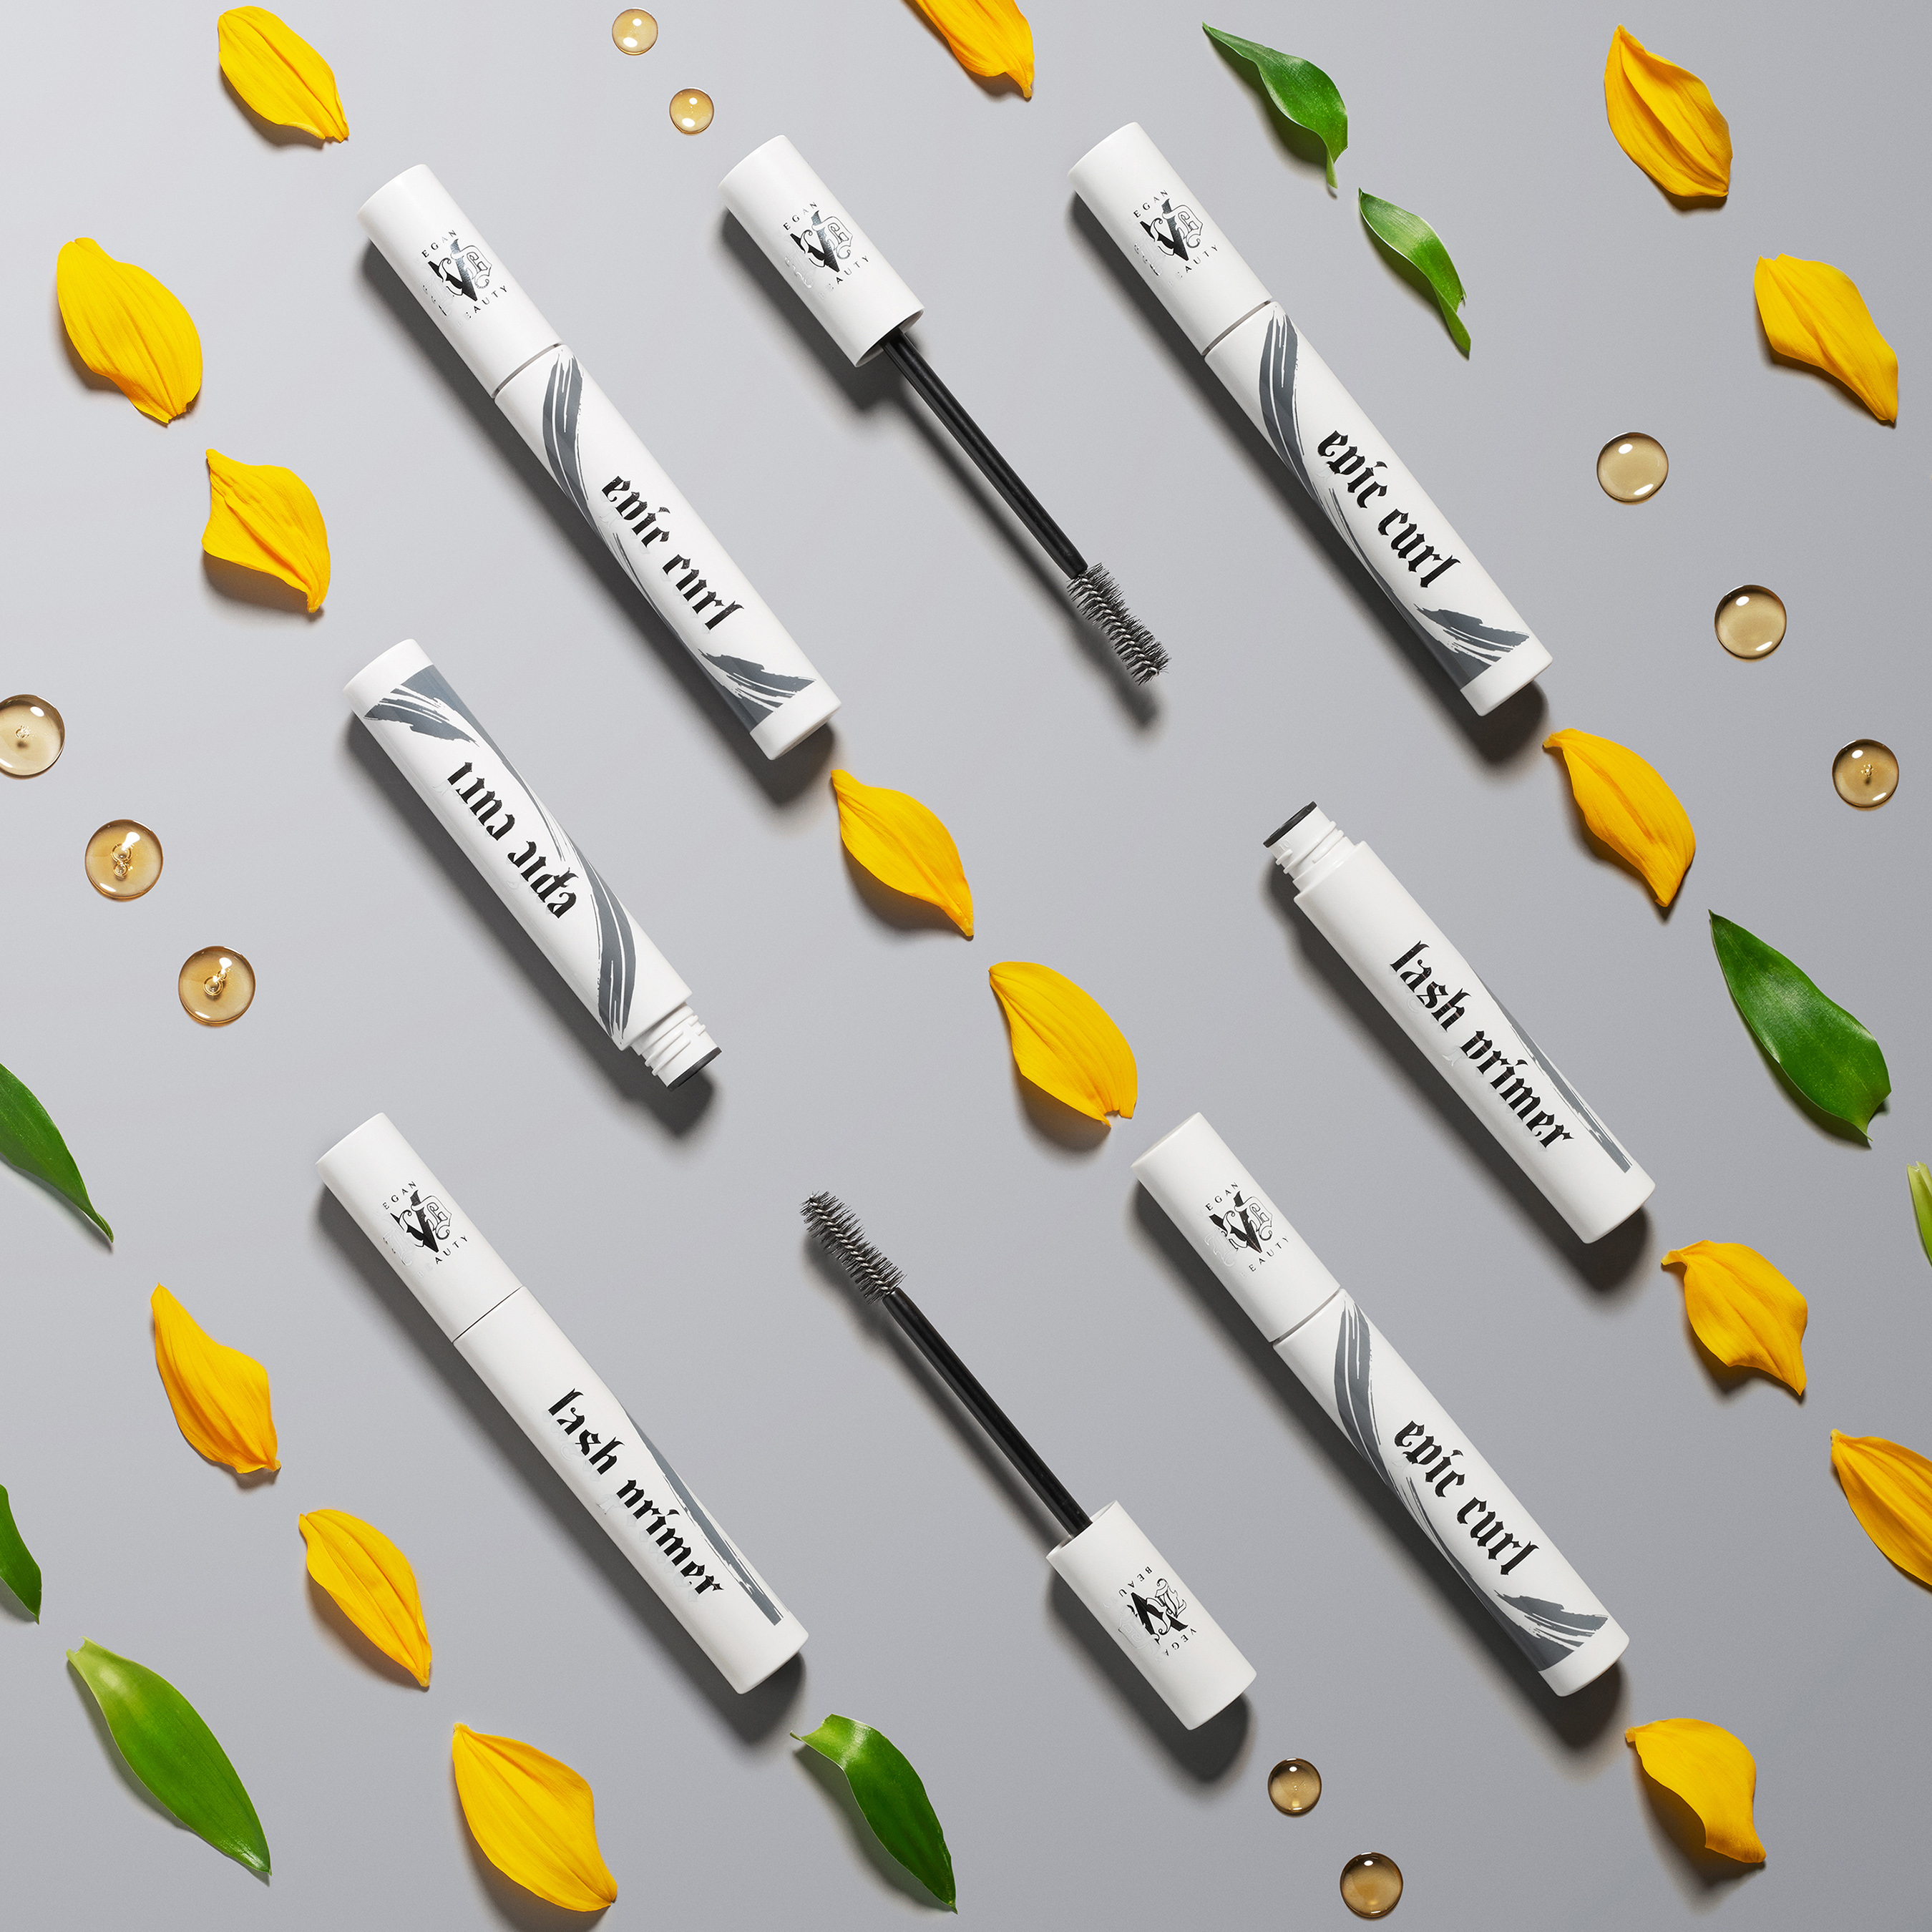 Epic Curl Vegan Lash Primer features 100% vegan ingredients including plant-based conditioners like sunflower seed oil for volume and Jojoba and Olive oil, to nourish lashes and keep them strong.